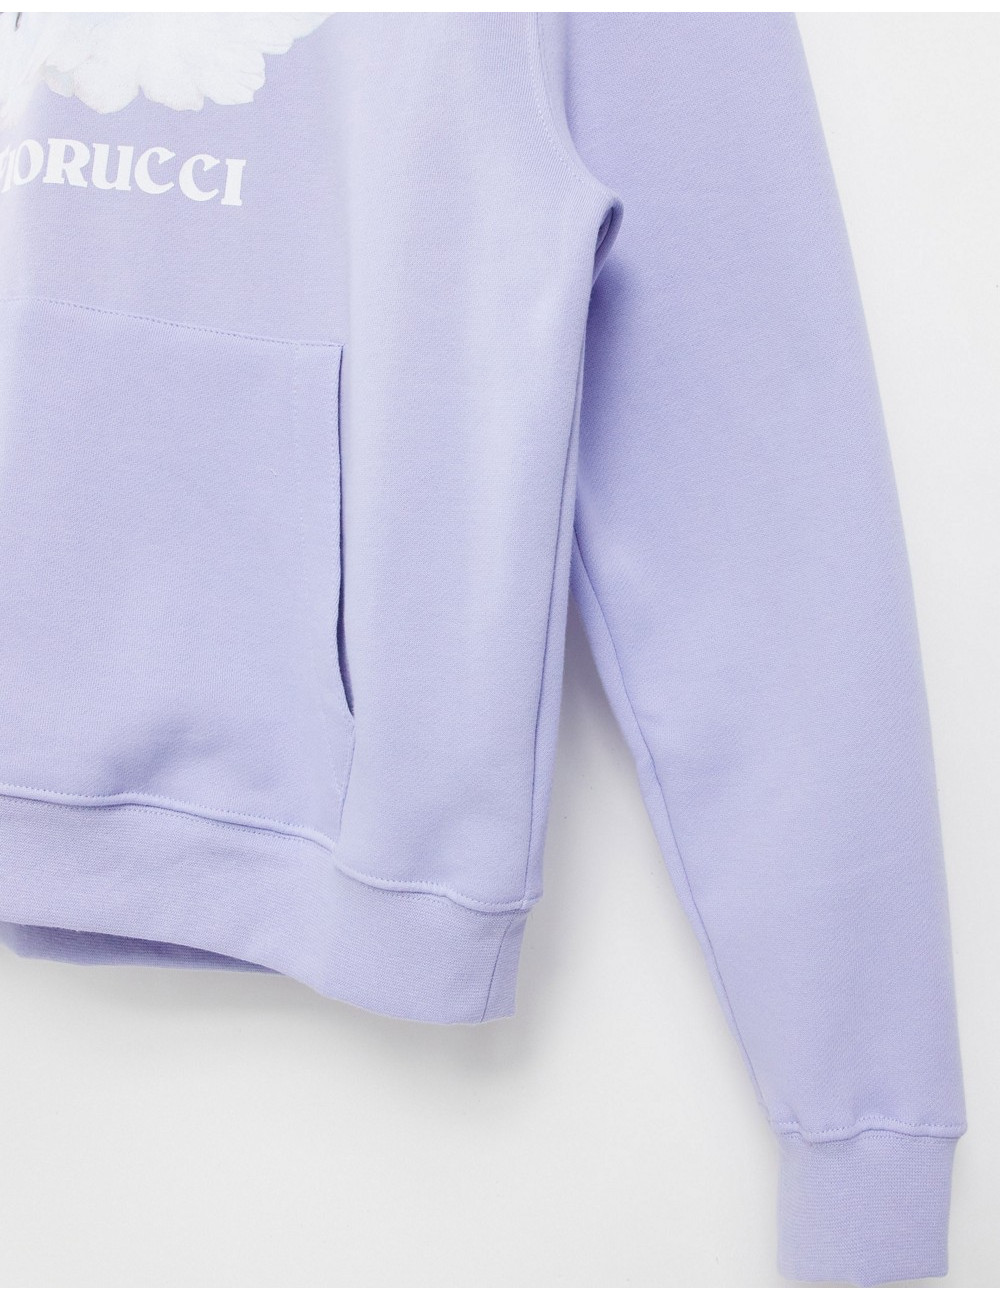 Fiorucci relaxed hoodie...